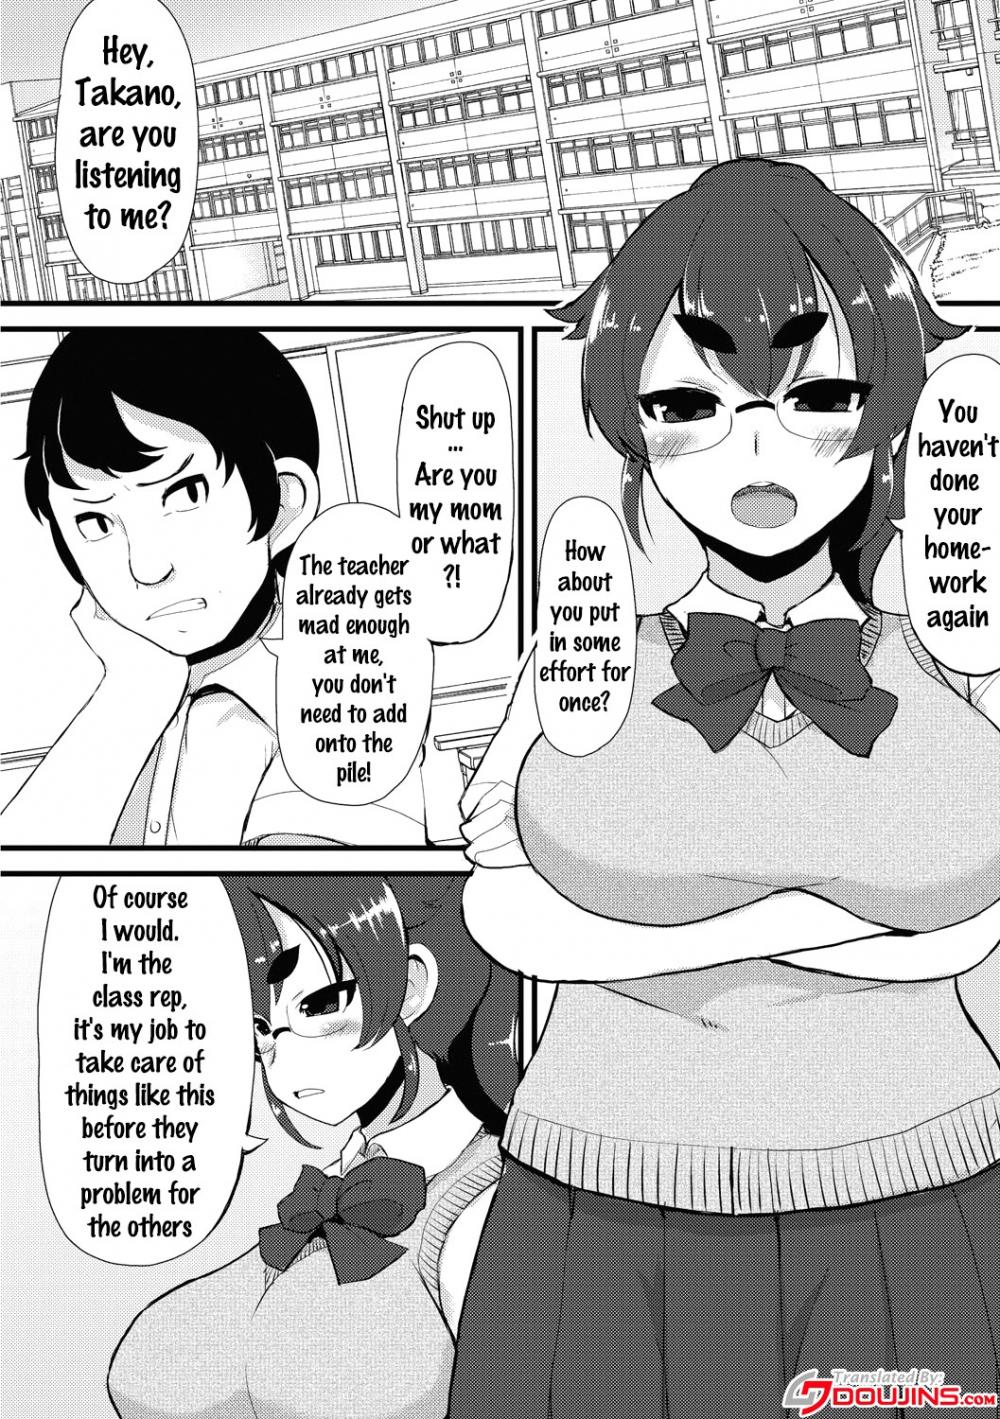 Hentai Manga Comic-A Large Breasted Honor Student Makes The Big Change to Perverted Masochist-Chapter 5-3